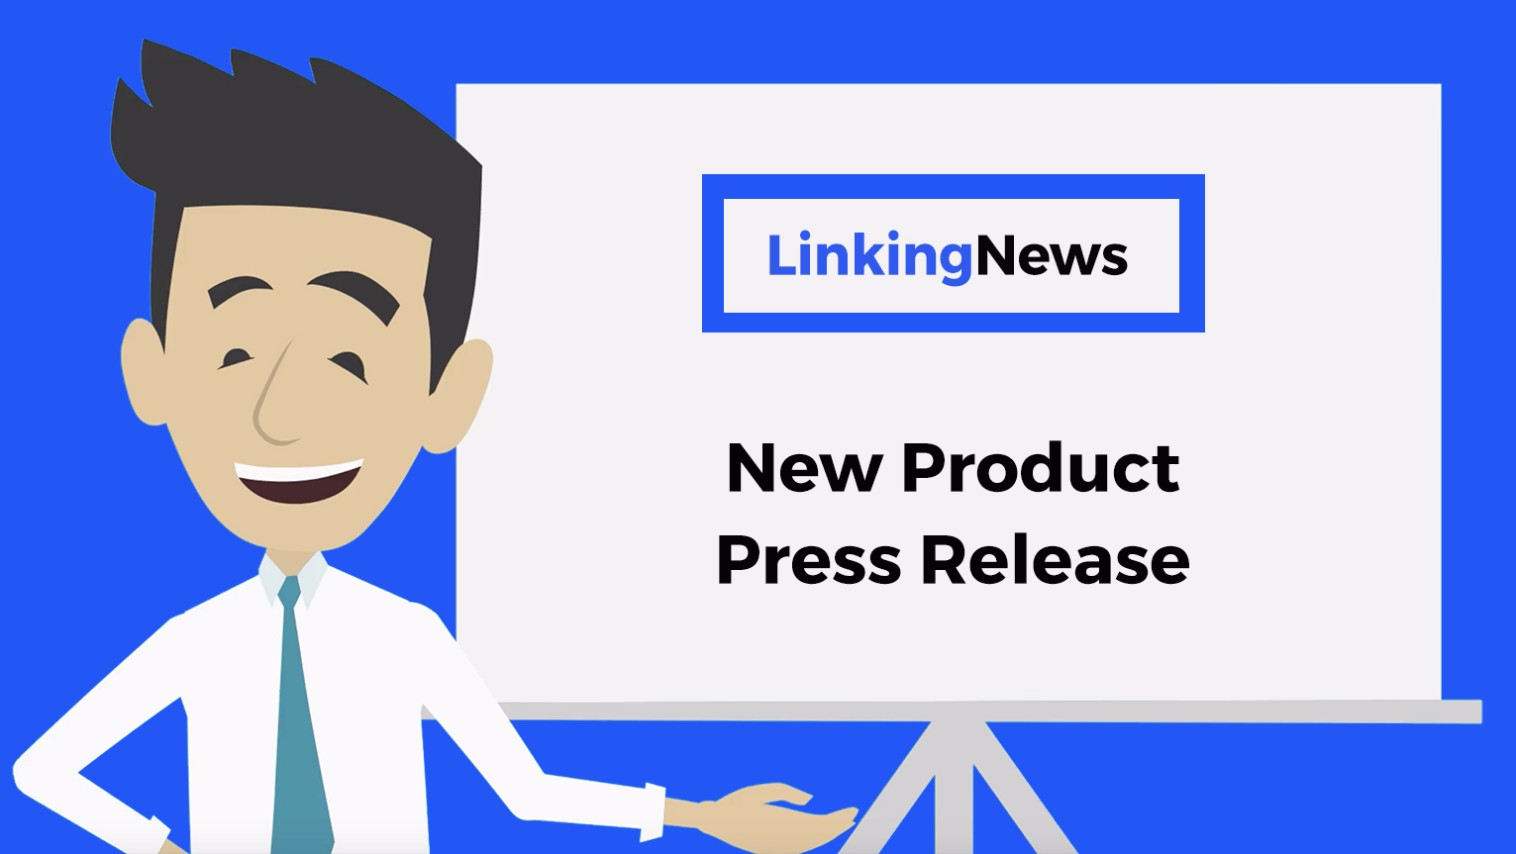 Linking News - How To Write A Press Release For A New Product, New Product Press Release Examples